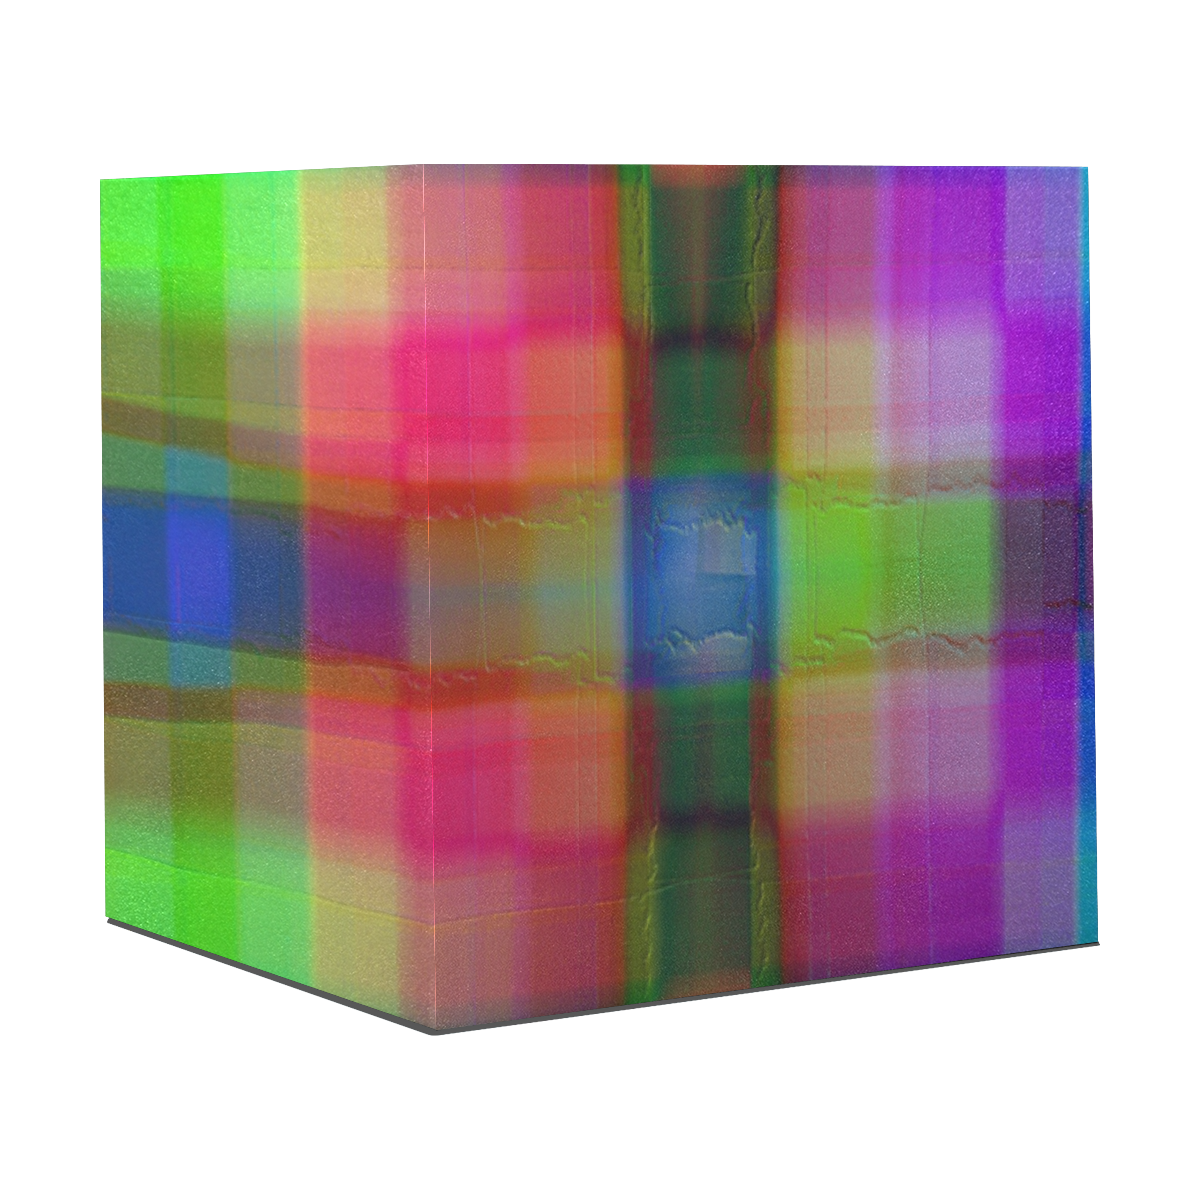 madras 6 Gift Wrapping Paper 58"x 23" (5 Rolls)